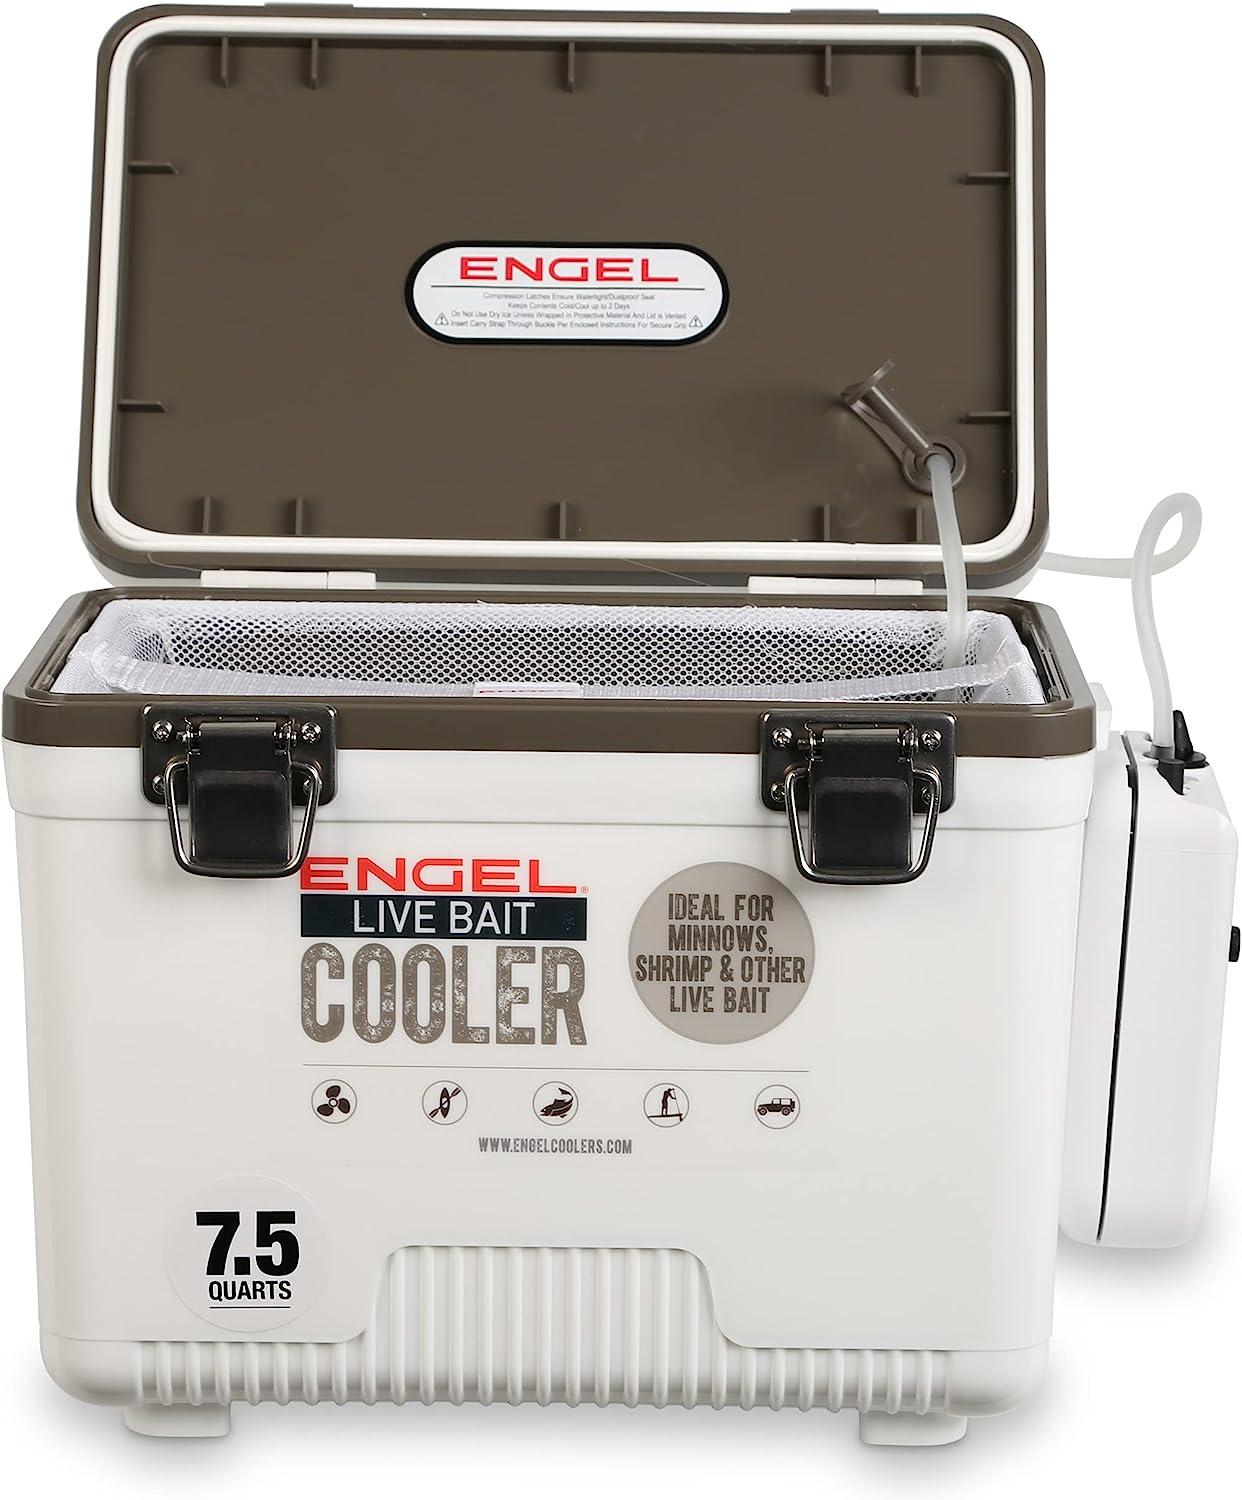 Engel 7.5qt Live Bait Cooler Box with 2nd Gen 2-Speed Portable Aerator  Pump. Fishing Bait Station and Minnow Bucket for Shrimp, Minnows, and Other  Live Bait - ENGLBC7-N White